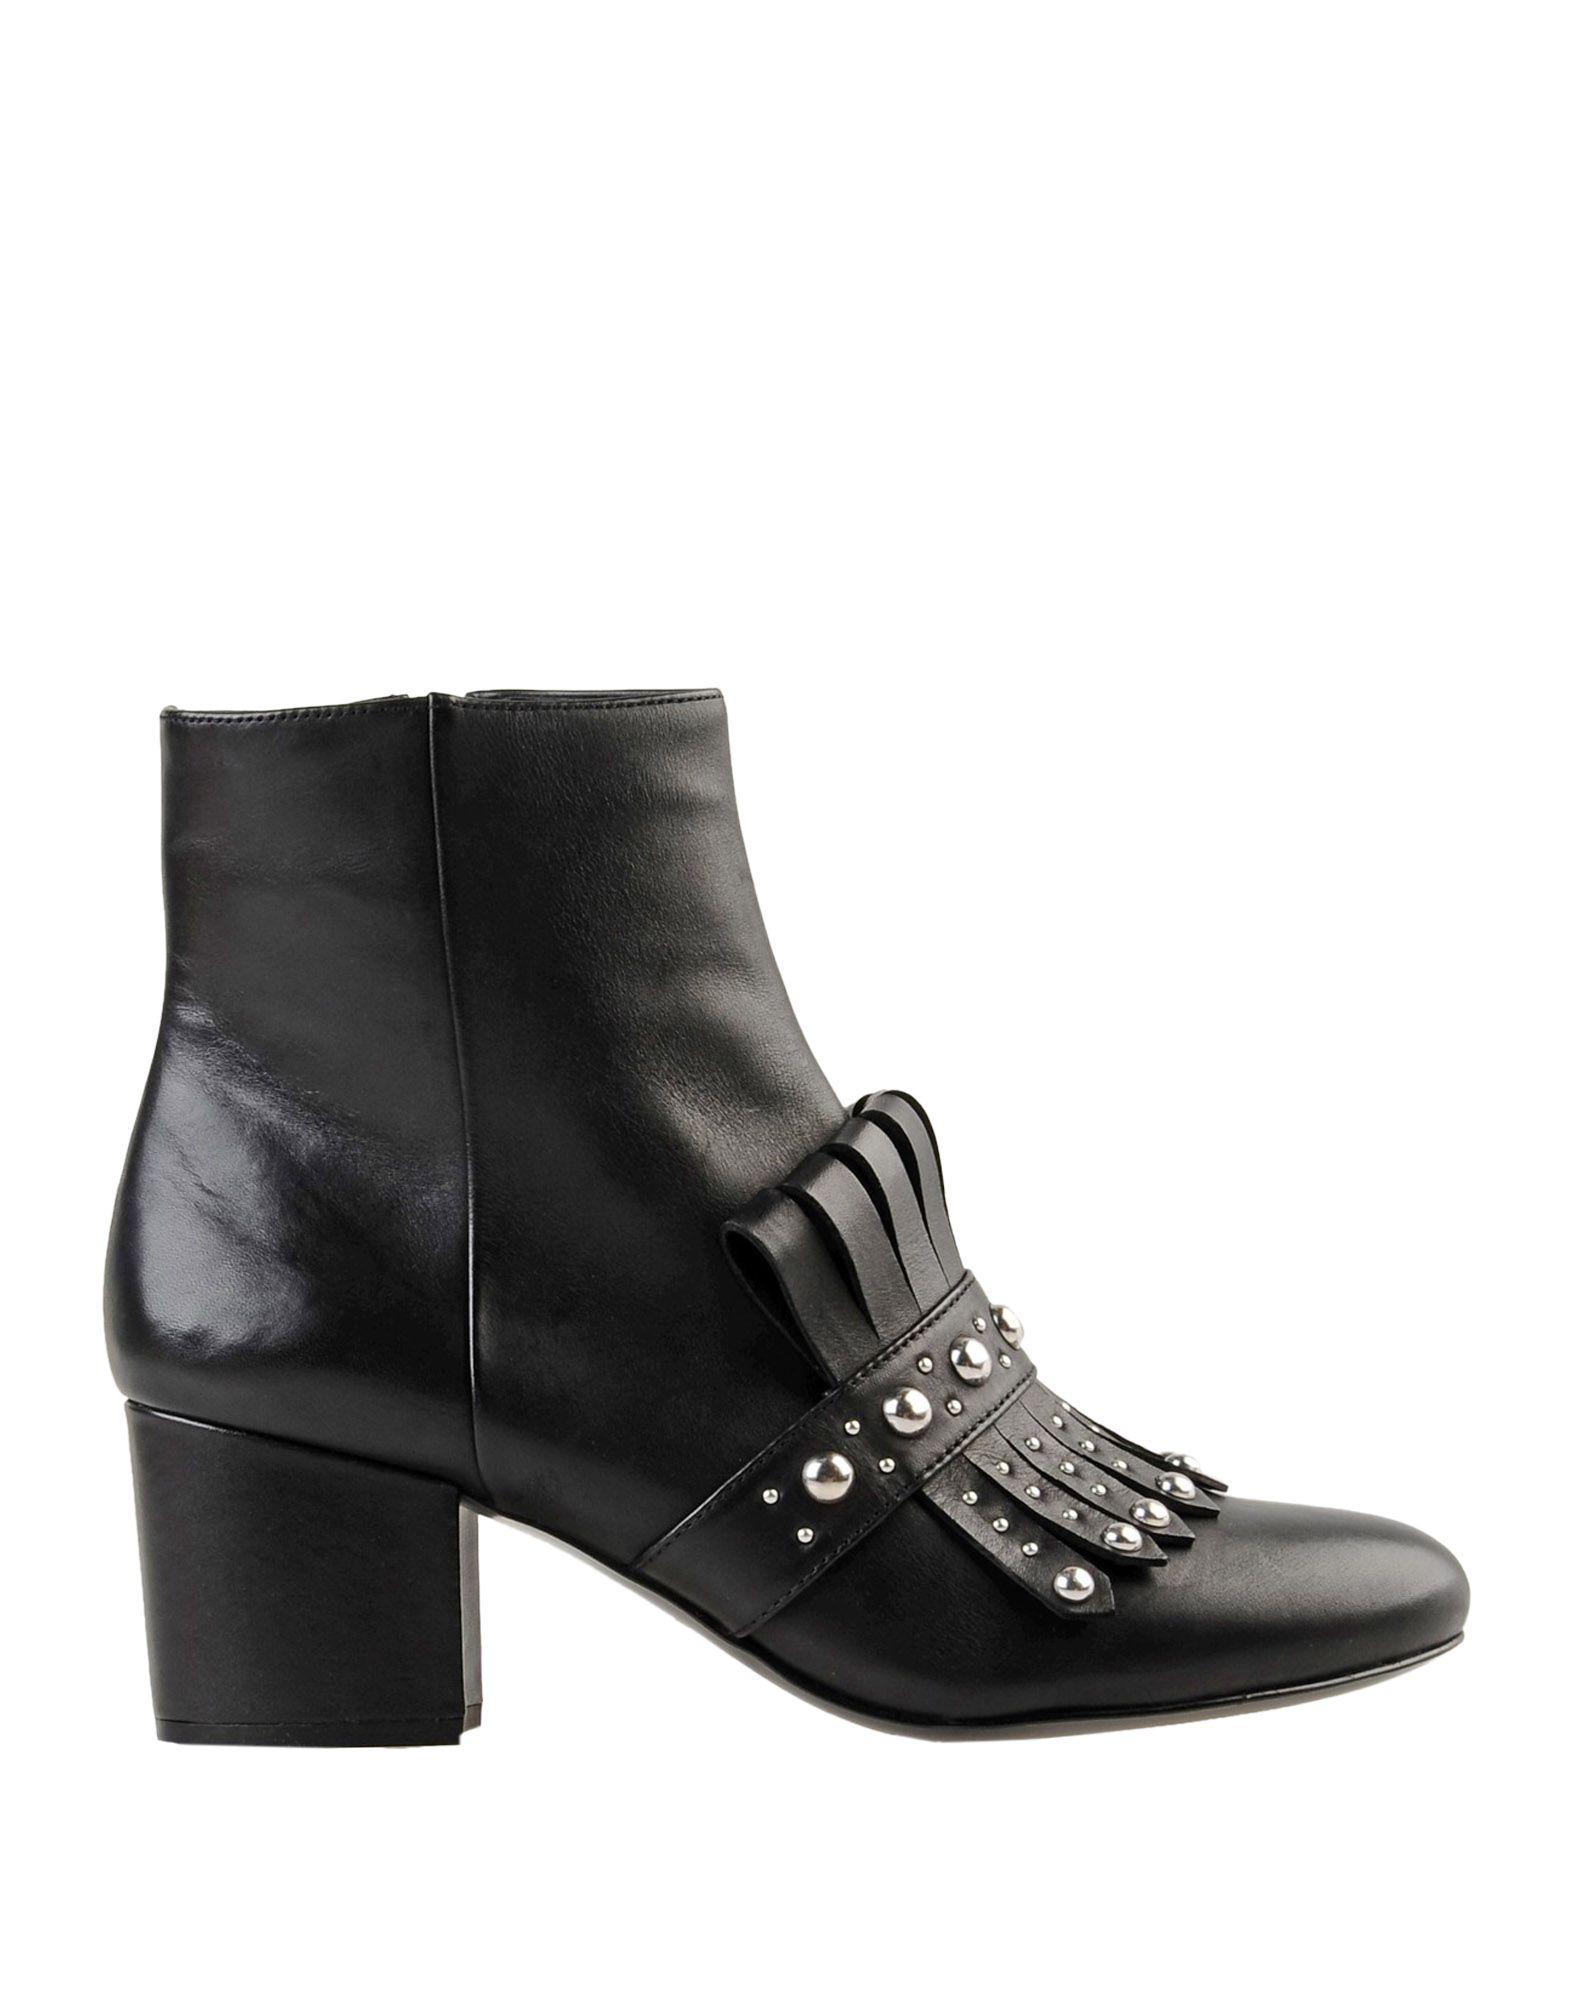 Nine West Ankle Boots in Black - Lyst